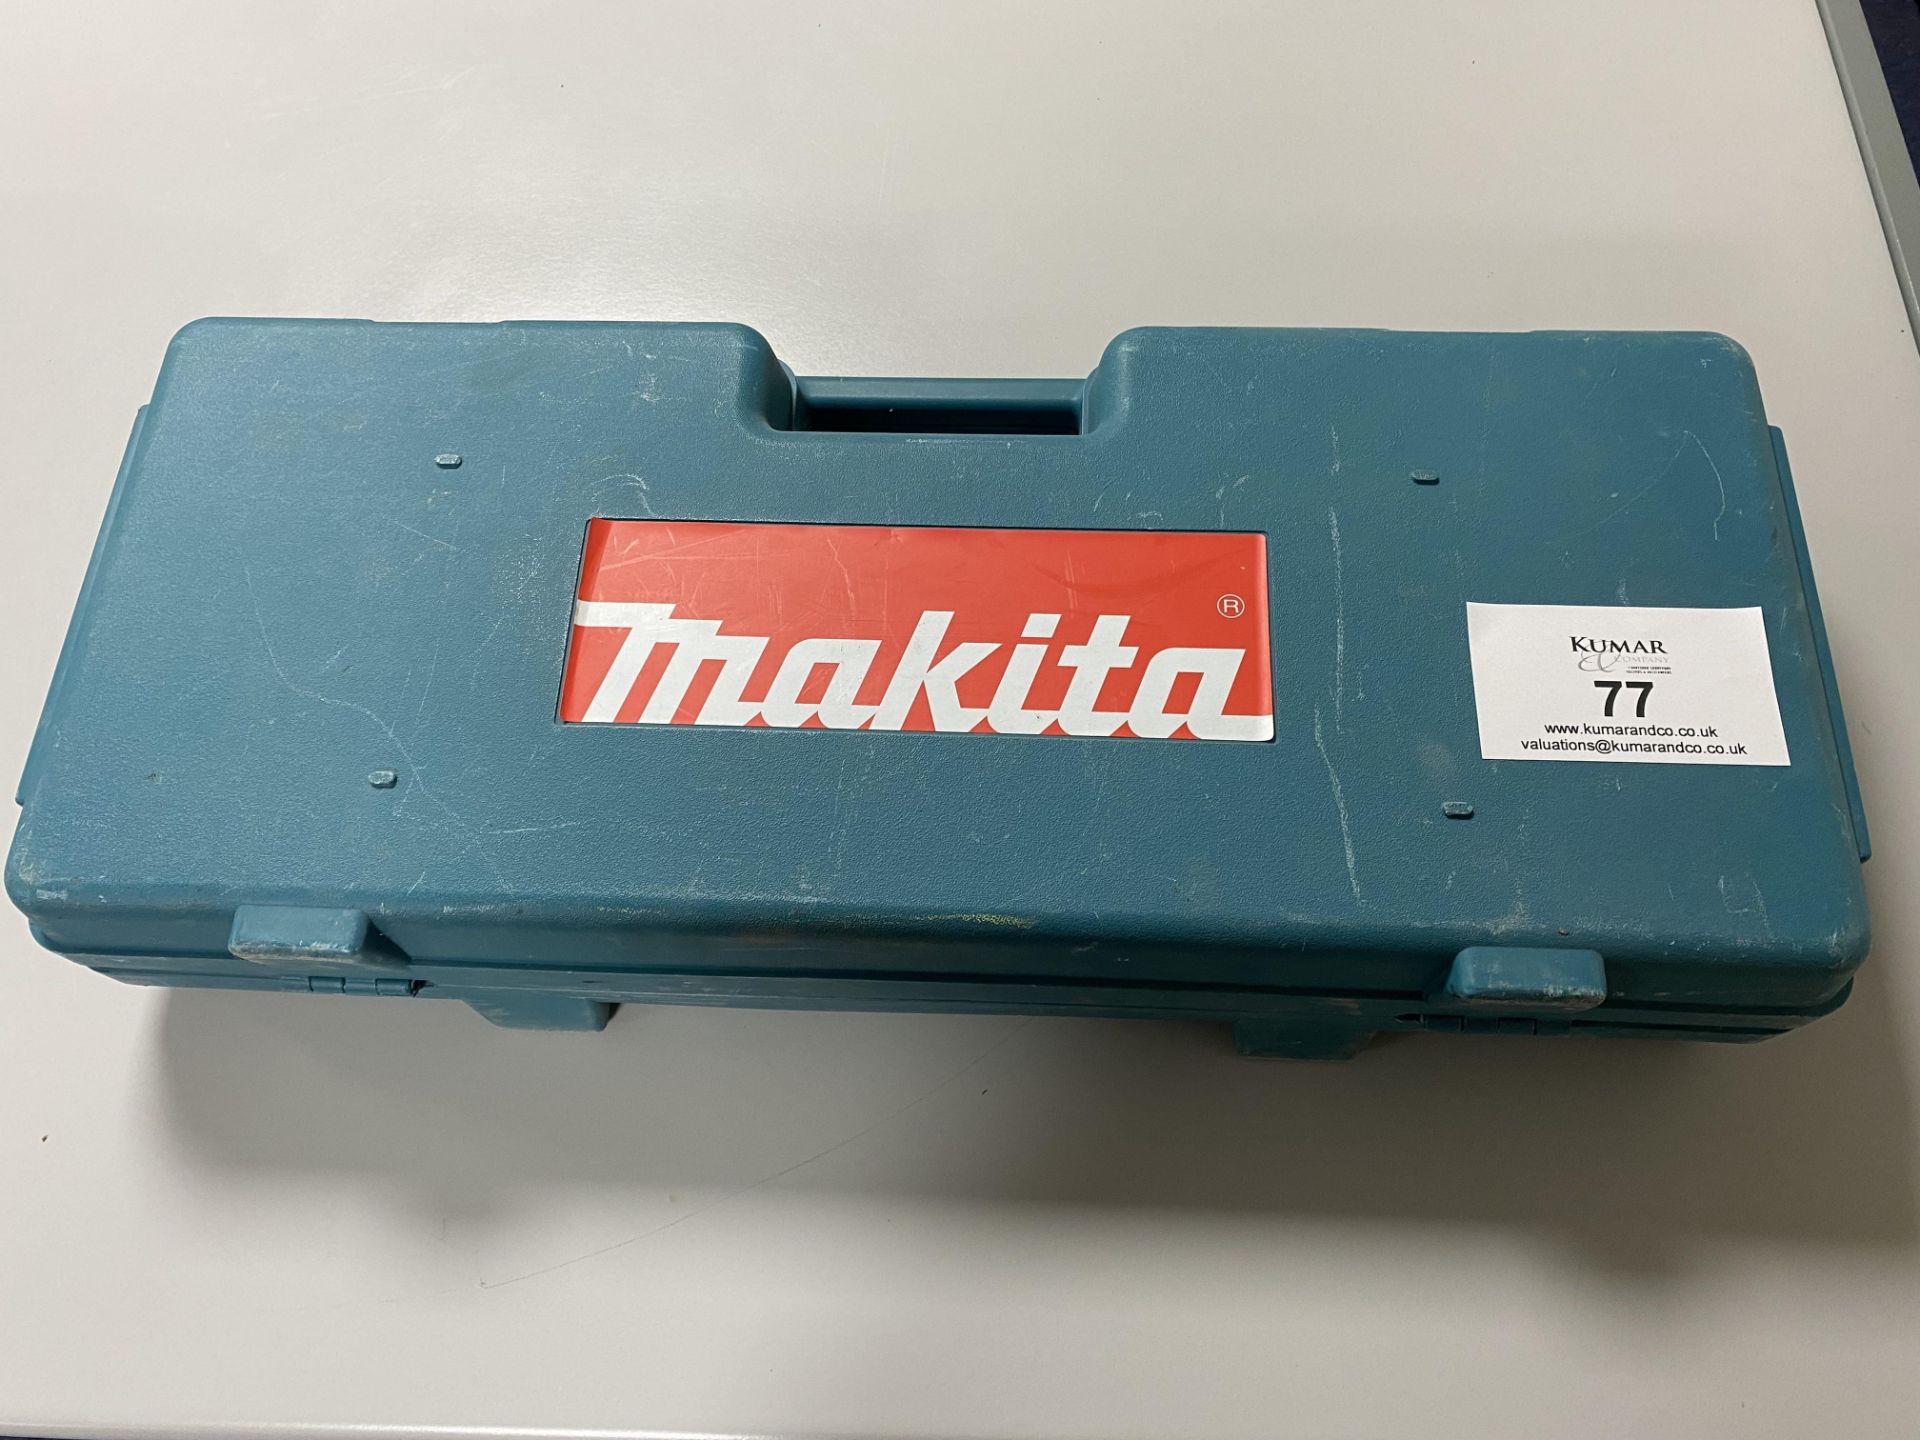 Makita JR3050T 110v Reciprocating Saw with assorted blades and Carry Case as Shown - Image 7 of 7